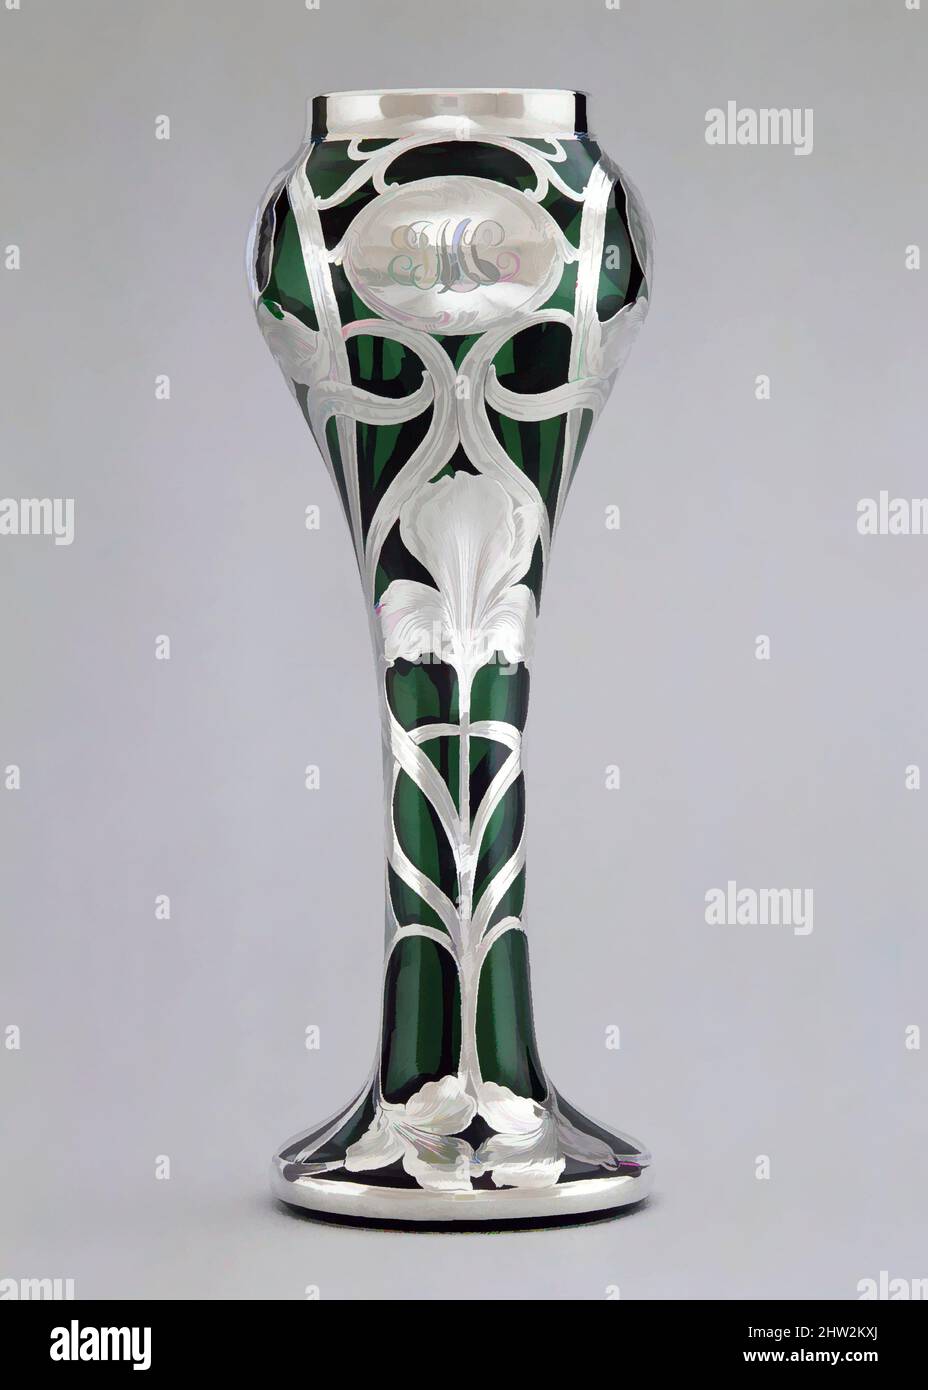 Art inspired by Vase, 1890–1905, Made in Providence, Rhode Island, United States, American, Glass, silver, Overall: 13 15/16 x 5 1/4 in. (35.4 x 13.3 cm); 36 oz. 4 dwt. (1126.2 g), Silver, The Alvin Manufacturing Company (1886–1928, Classic works modernized by Artotop with a splash of modernity. Shapes, color and value, eye-catching visual impact on art. Emotions through freedom of artworks in a contemporary way. A timeless message pursuing a wildly creative new direction. Artists turning to the digital medium and creating the Artotop NFT Stock Photo